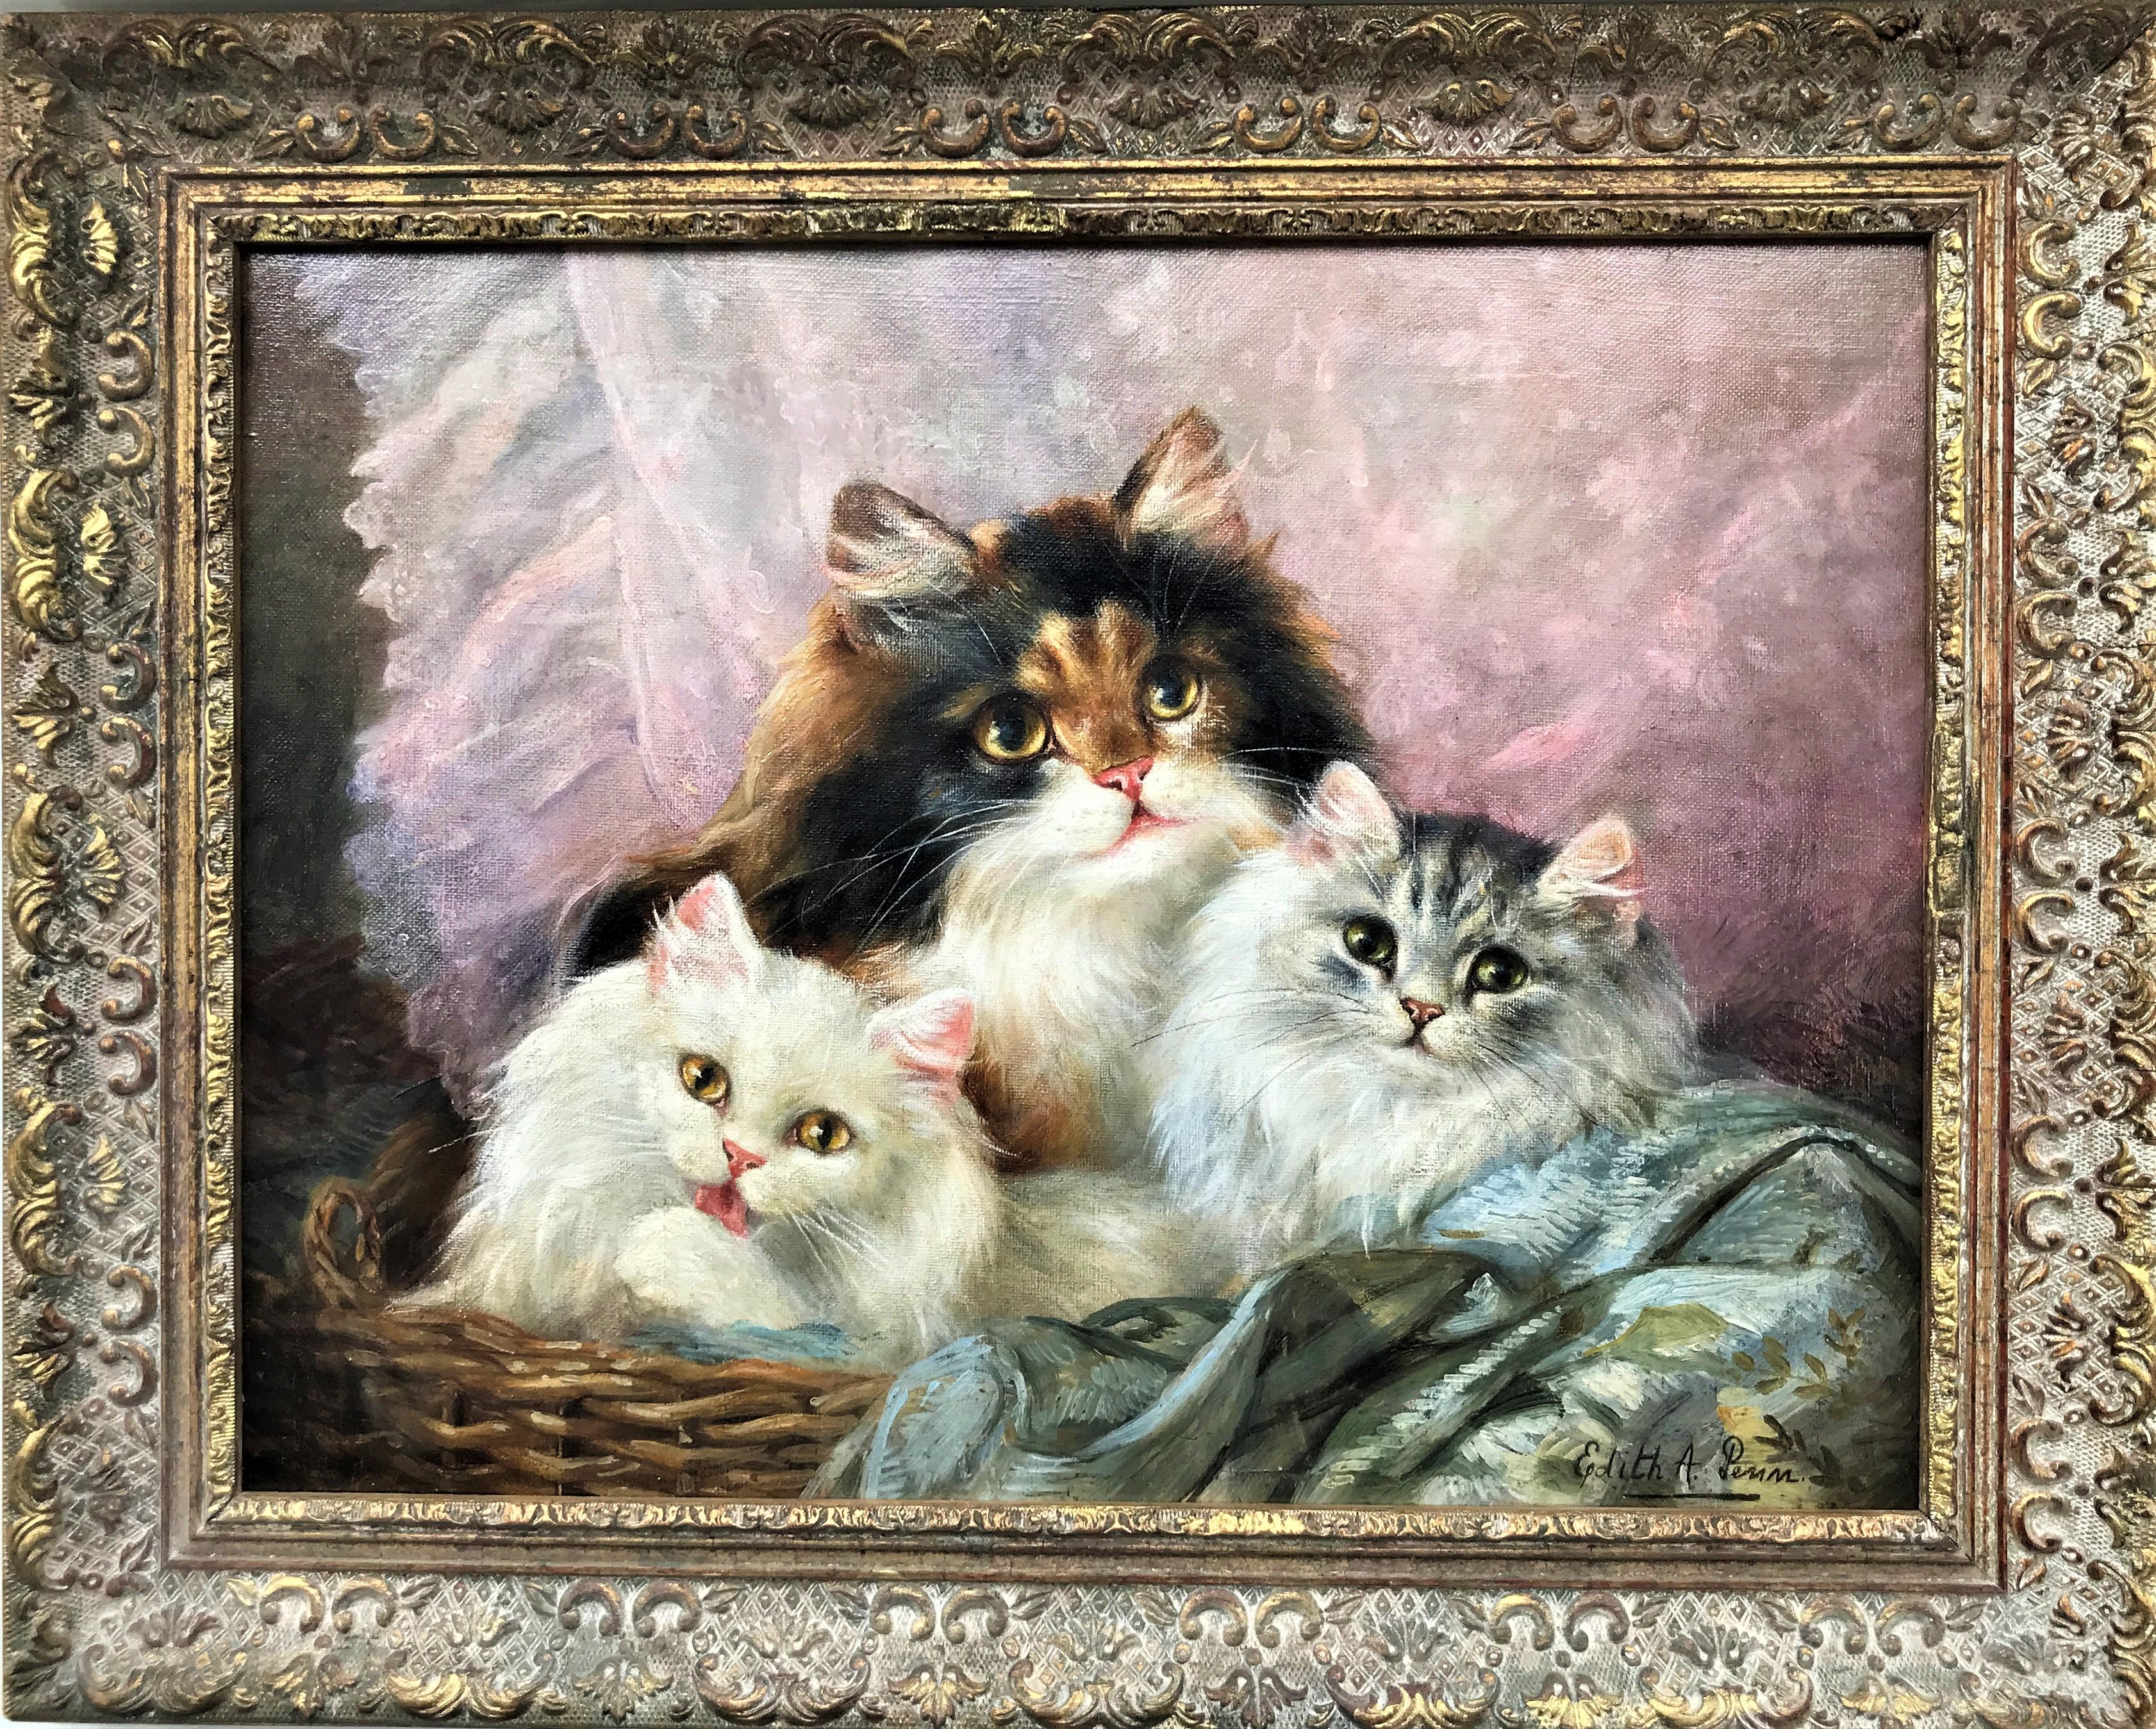 Three Cats in a Basket, original oil on canvas, signed lower right, 20thC - Painting by Edith A. Penn